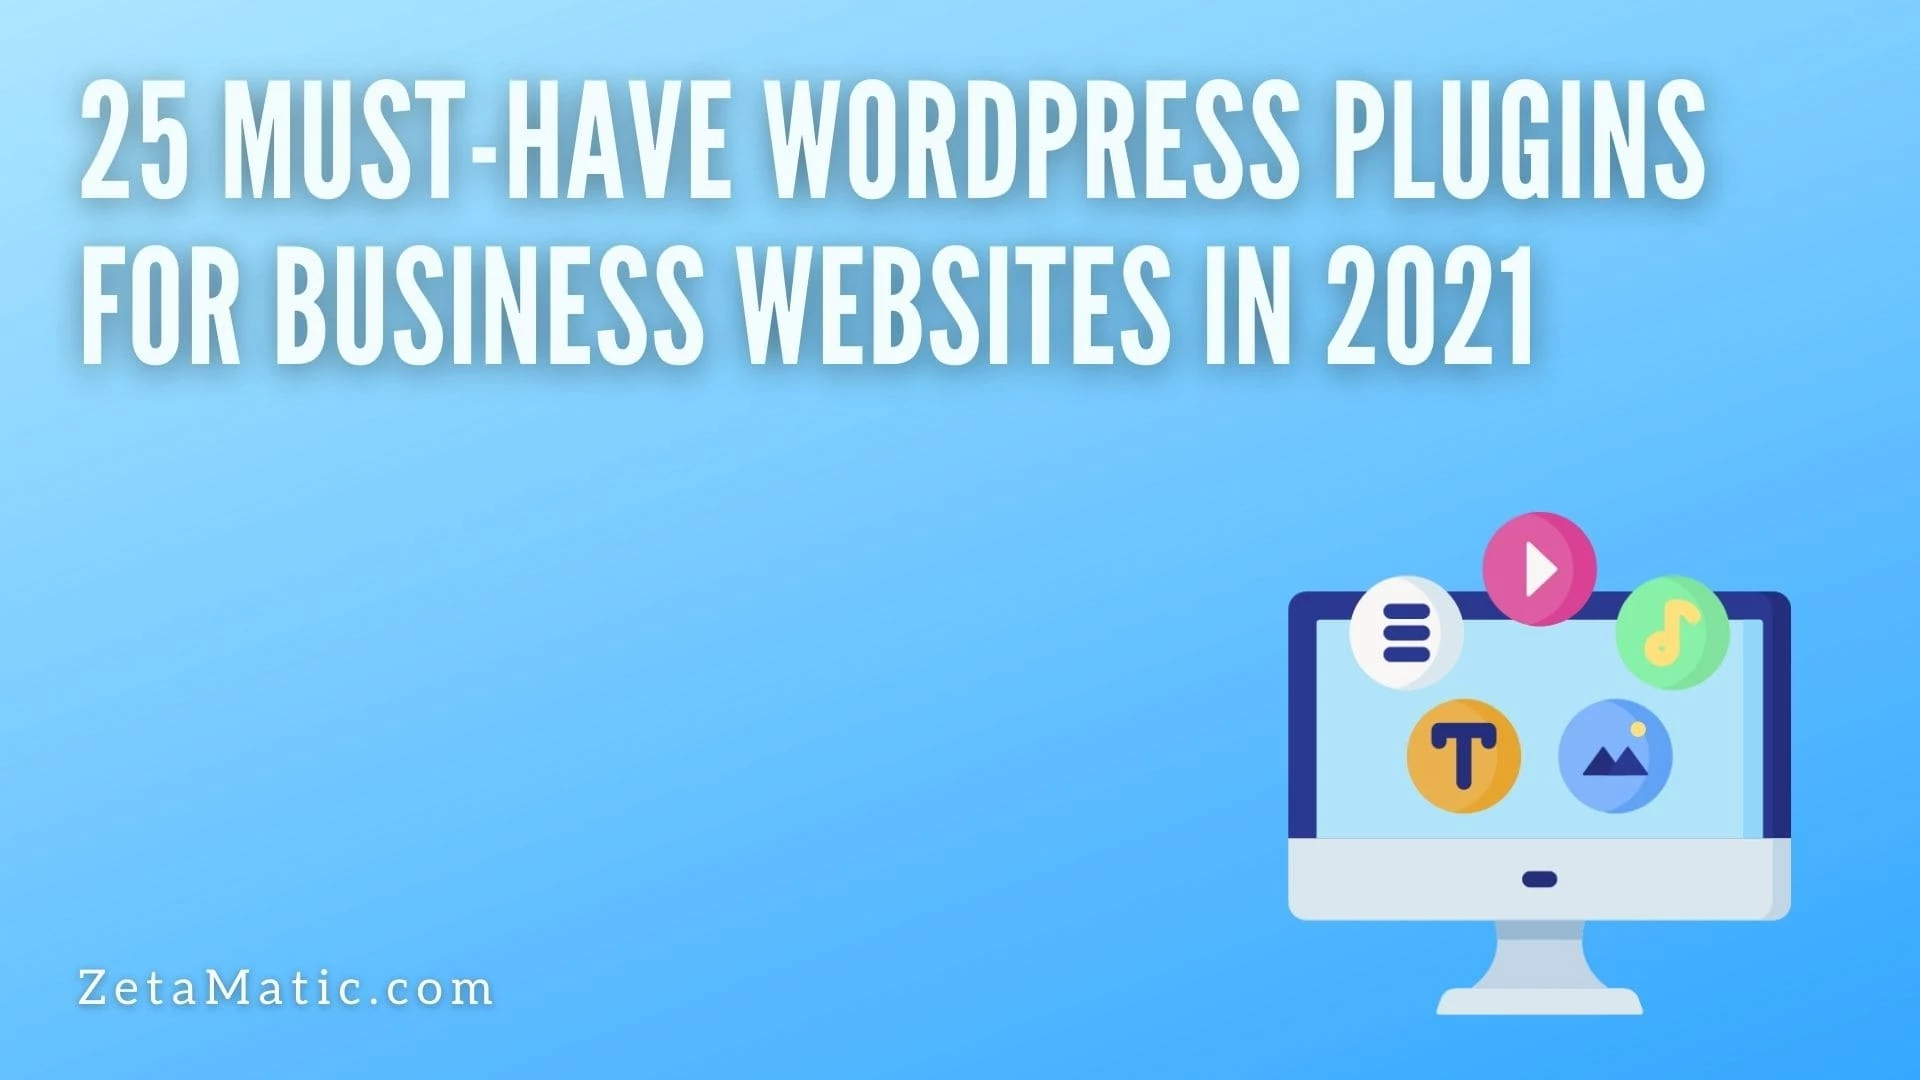 25 Must-Have WordPress Plugins for Business Websites in 2021